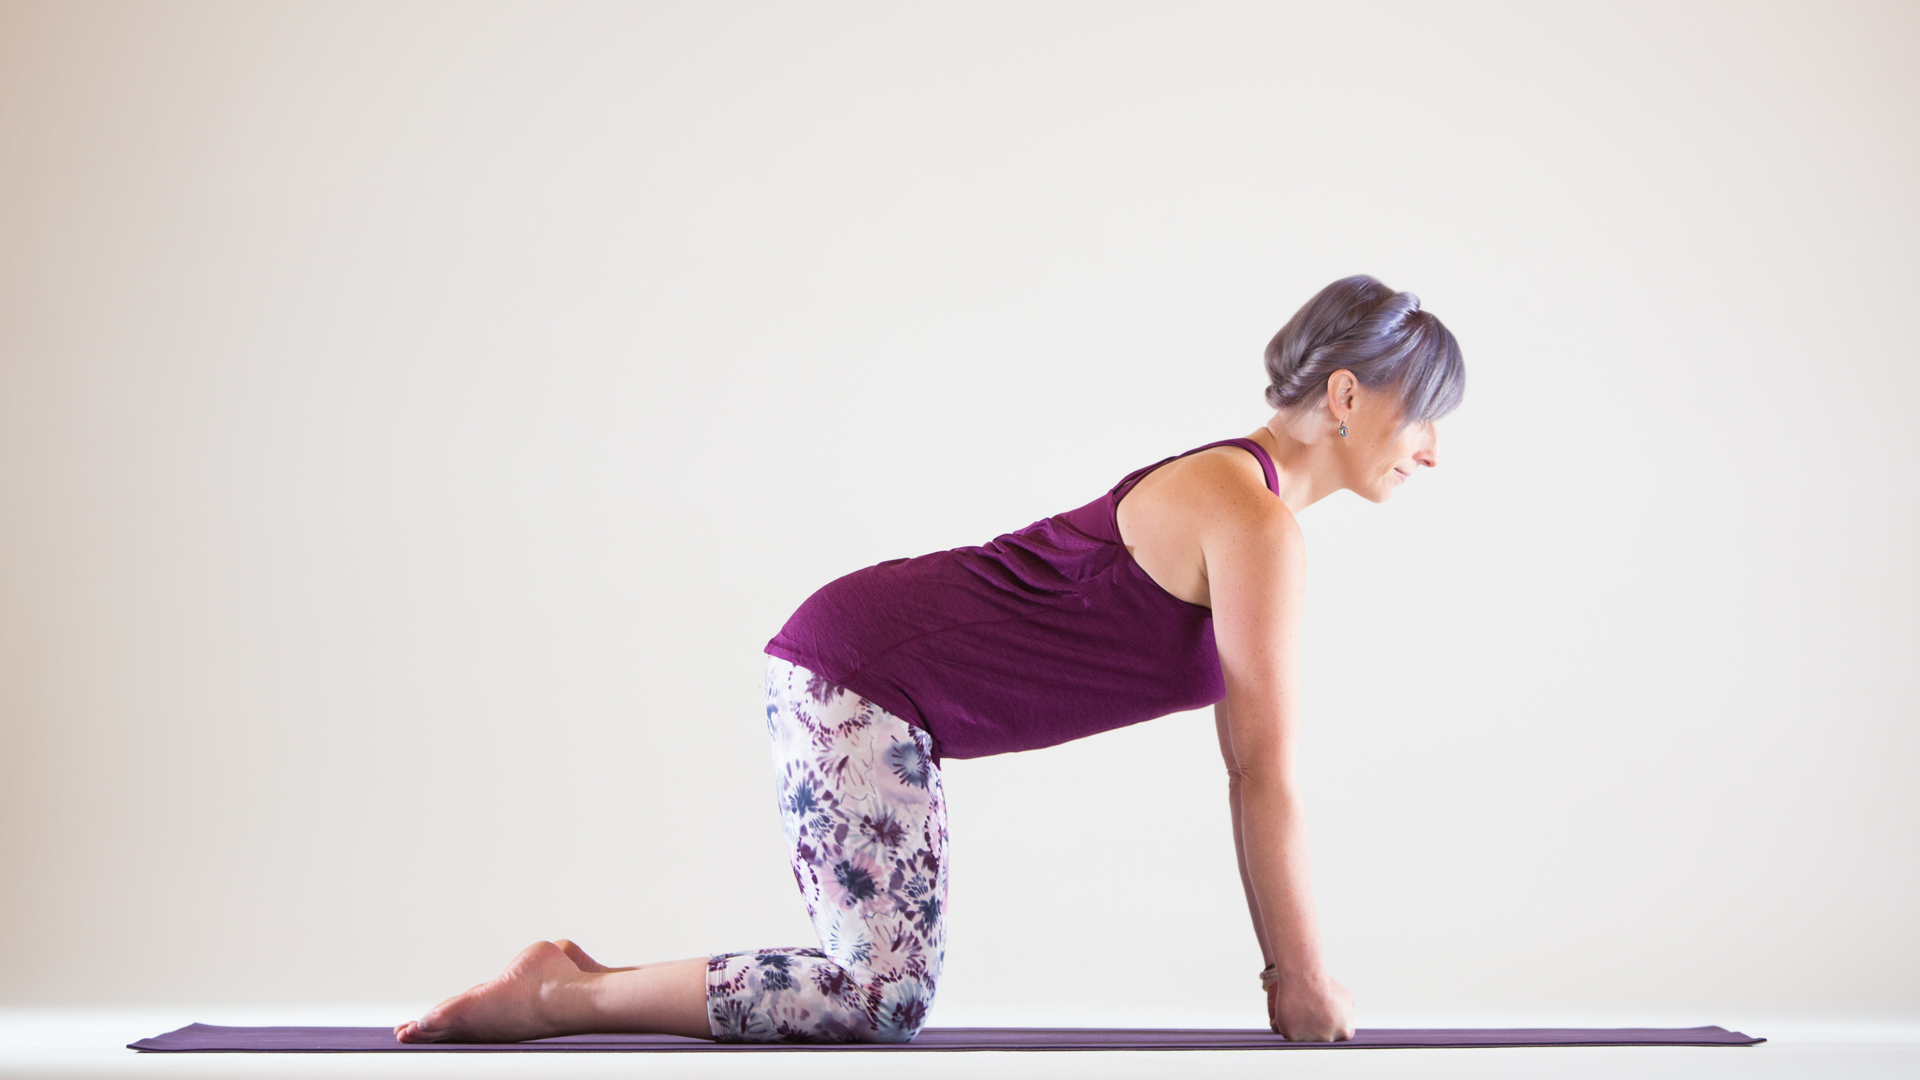 Beginning Yoga For Seniors: 10 Gentle Poses to Start With - Welltech